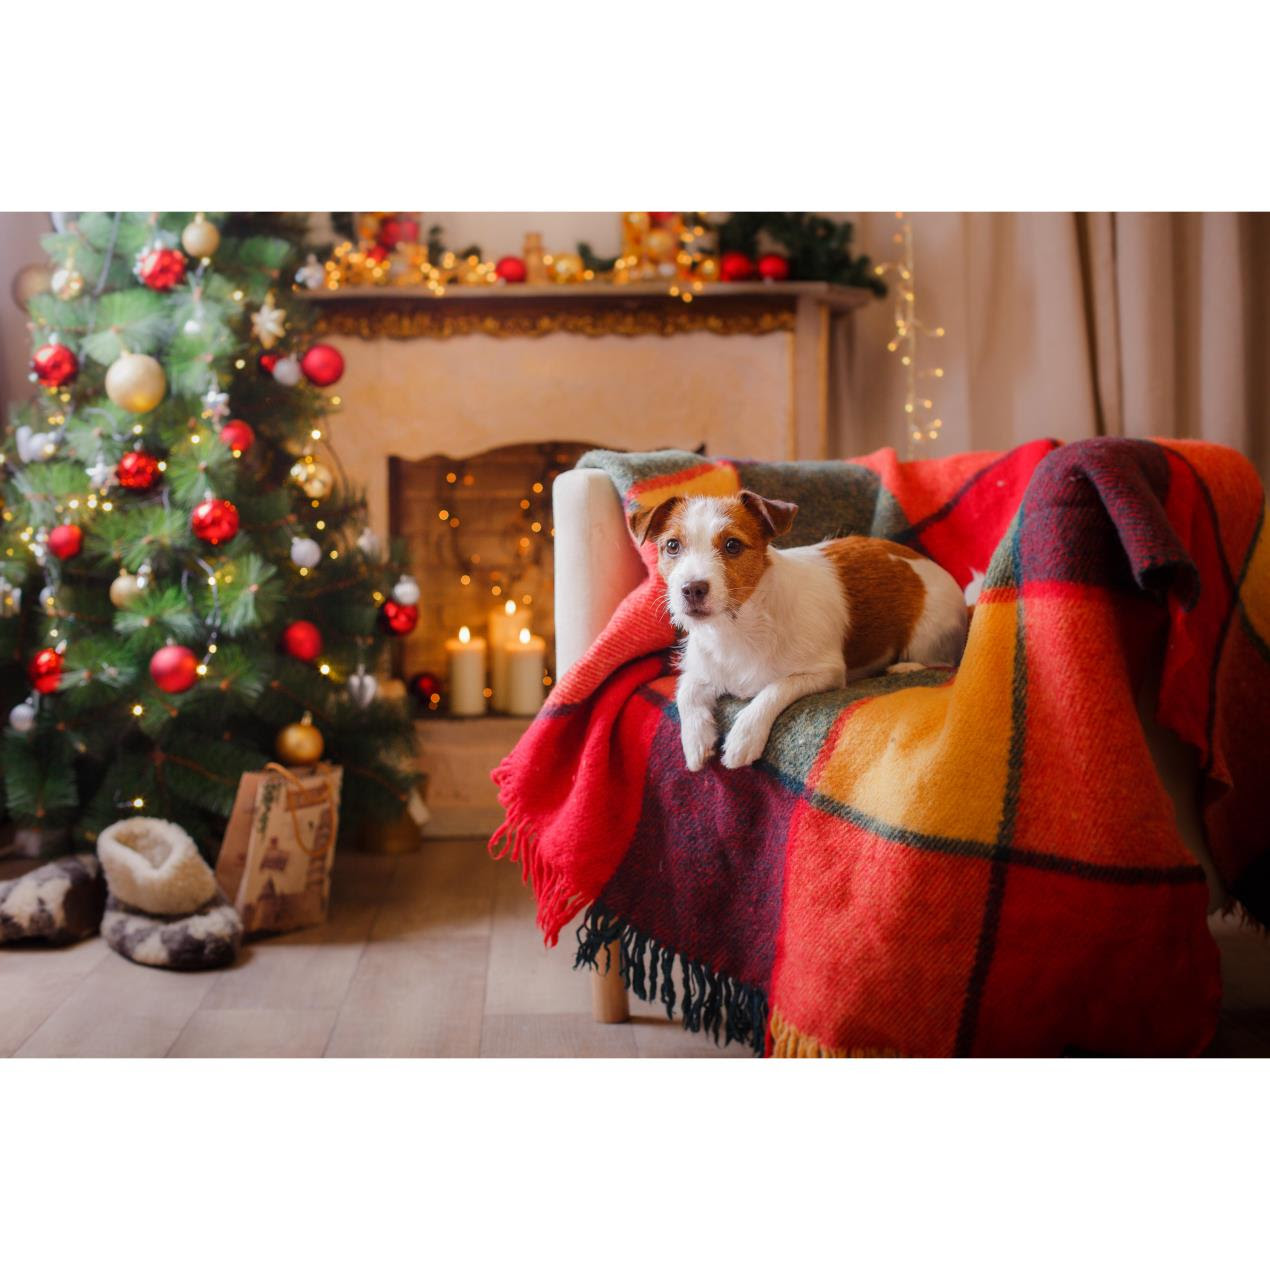 Brown and white dog sat on chair near Christmas tree